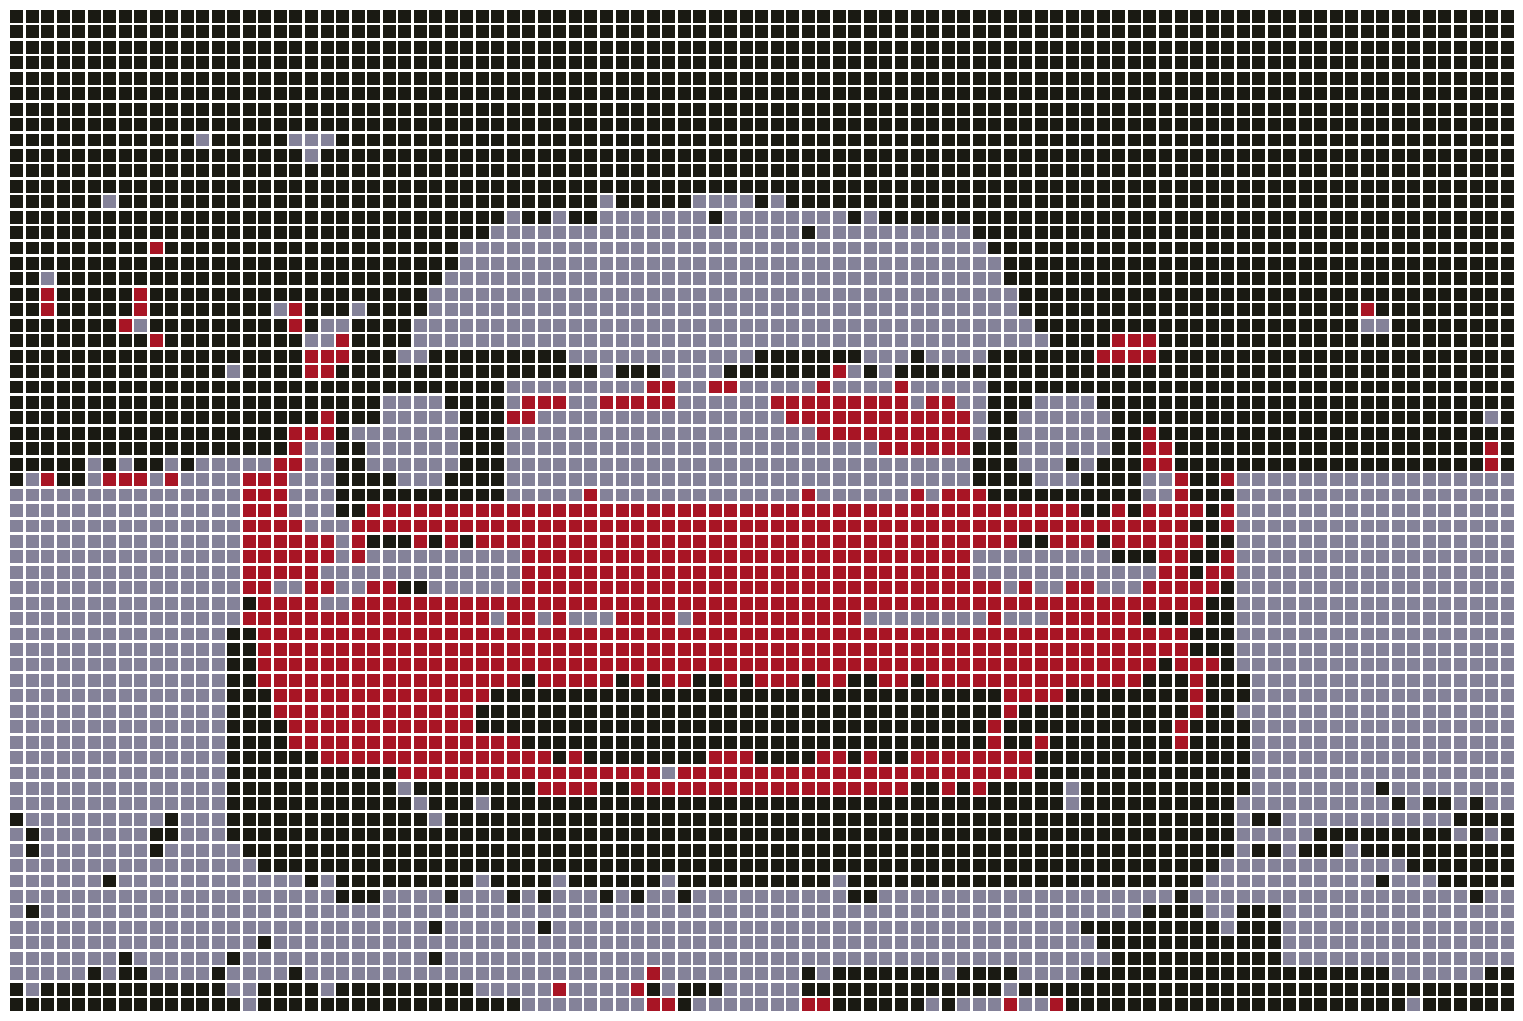 pixelated Miata with sil clustering